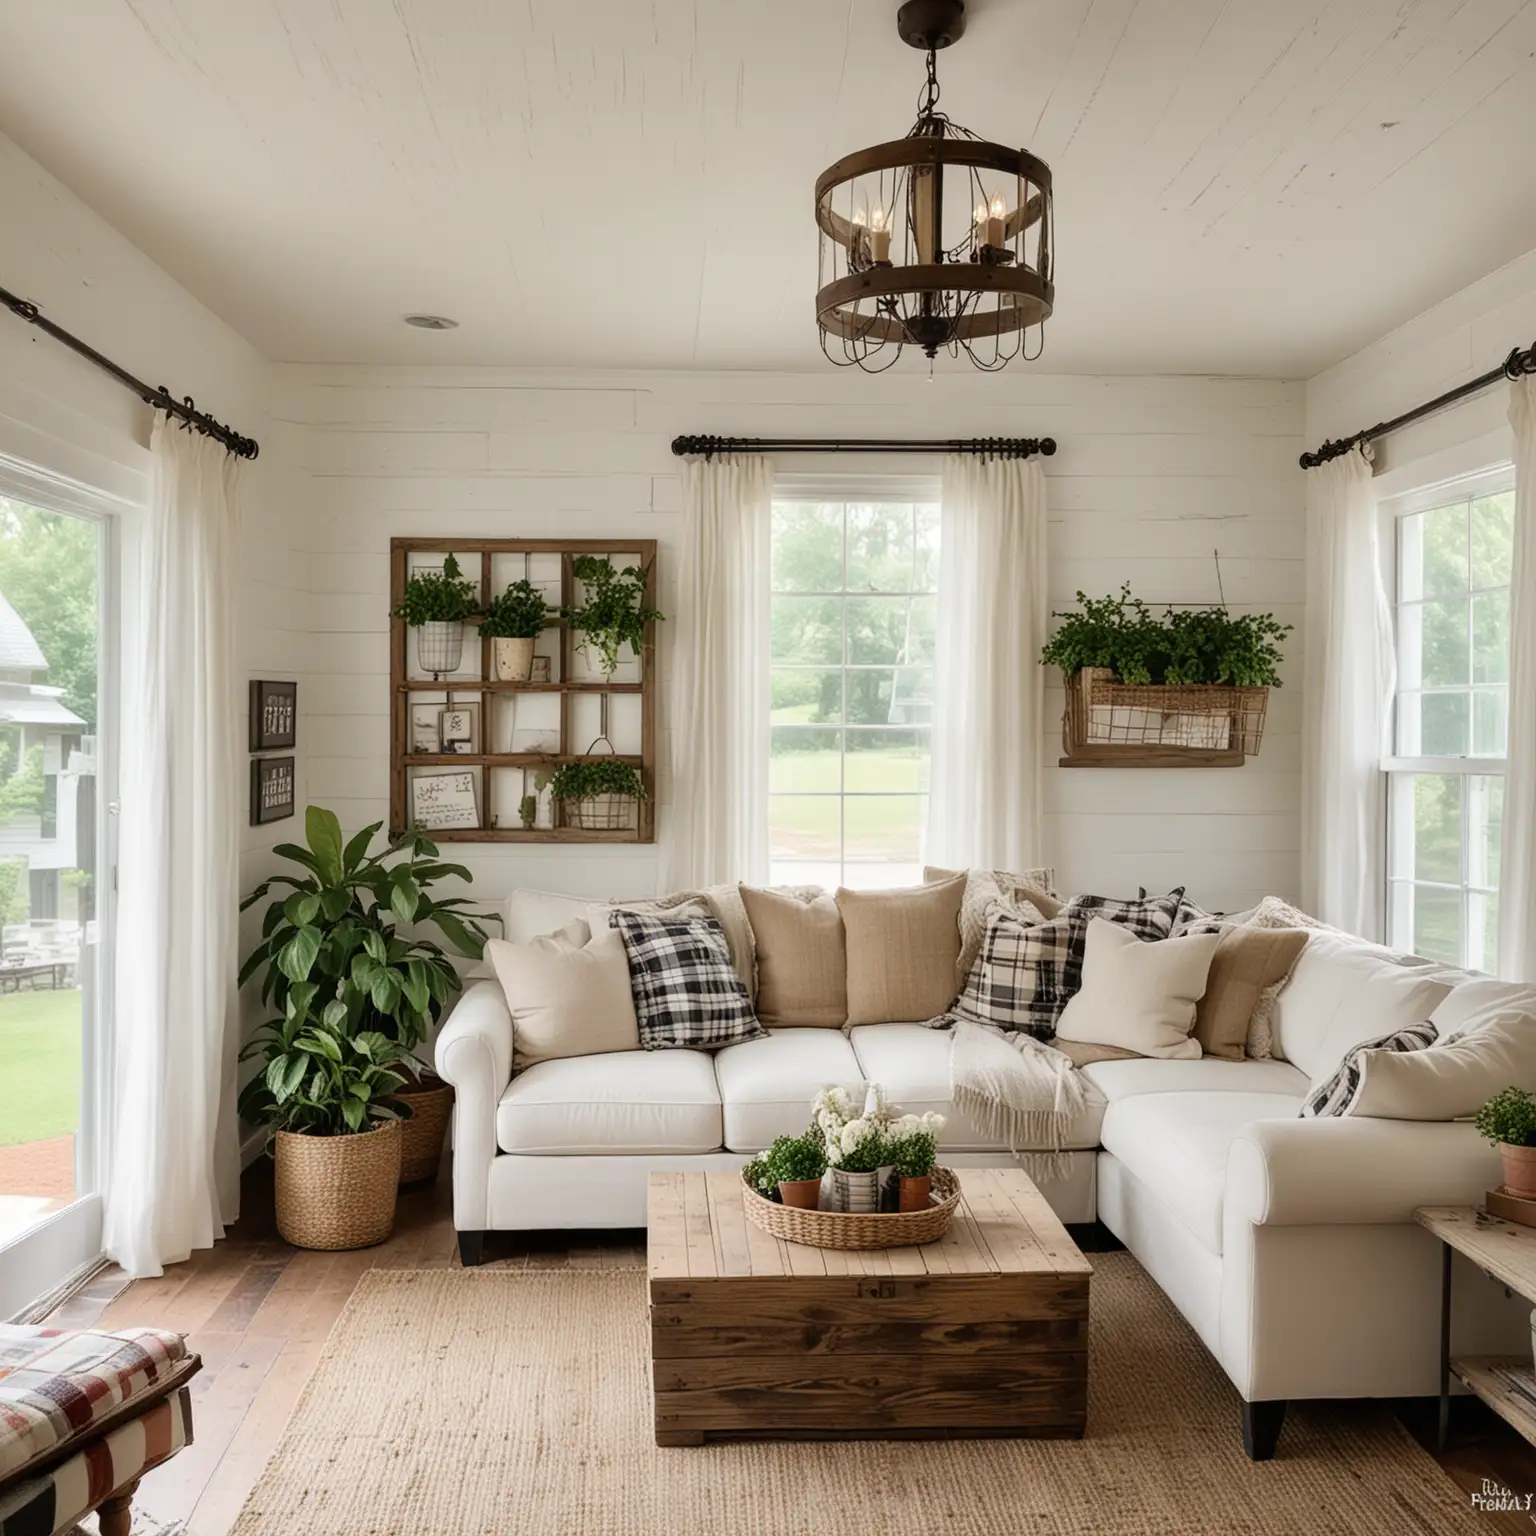 a dutch angle shot of A cozy living room with white shiplap walls, large windows with light curtains, and distressed wood flooring. Include a linen sofa with plaid and striped throw pillows, a reclaimed wood coffee table with farmhouse decor items, and a checkered rug. Add a wall-mounted flat-screen TV, farmhouse wall signs, vintage decor, a few large potted plants, a couple of mason jar vases, a woven basket, a farmhouse-style chandelier, and a modern air conditioner.